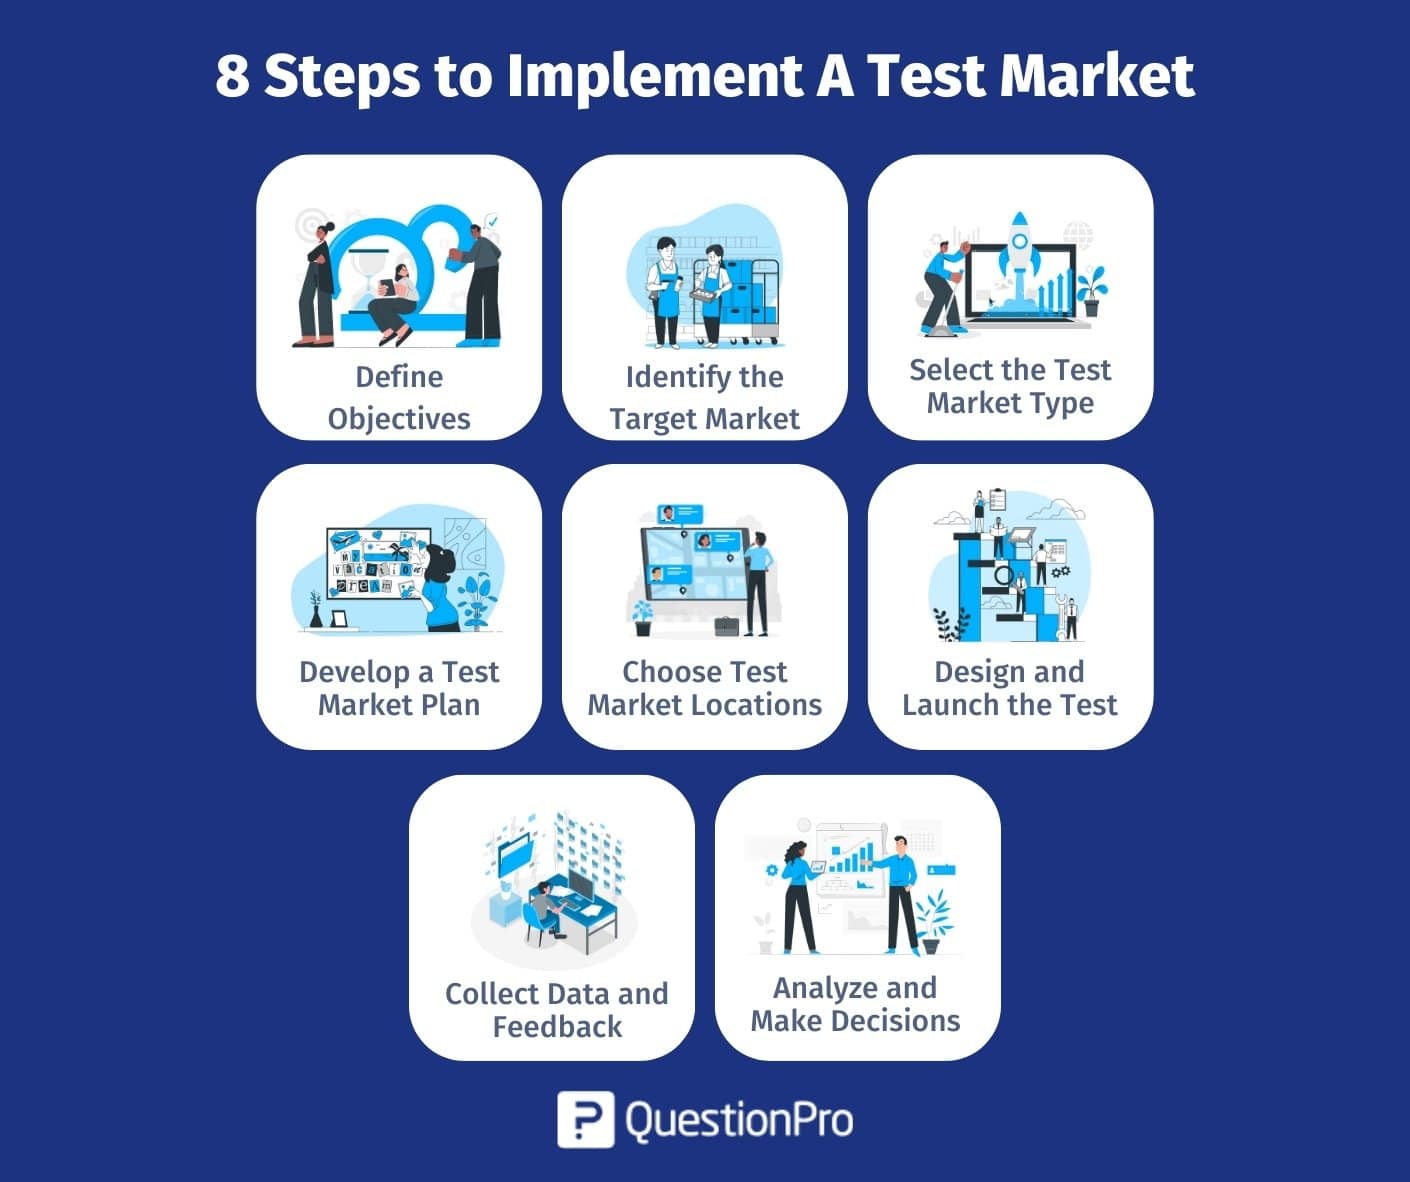 10 Reasons Why Test Marketing Helps Business Growth